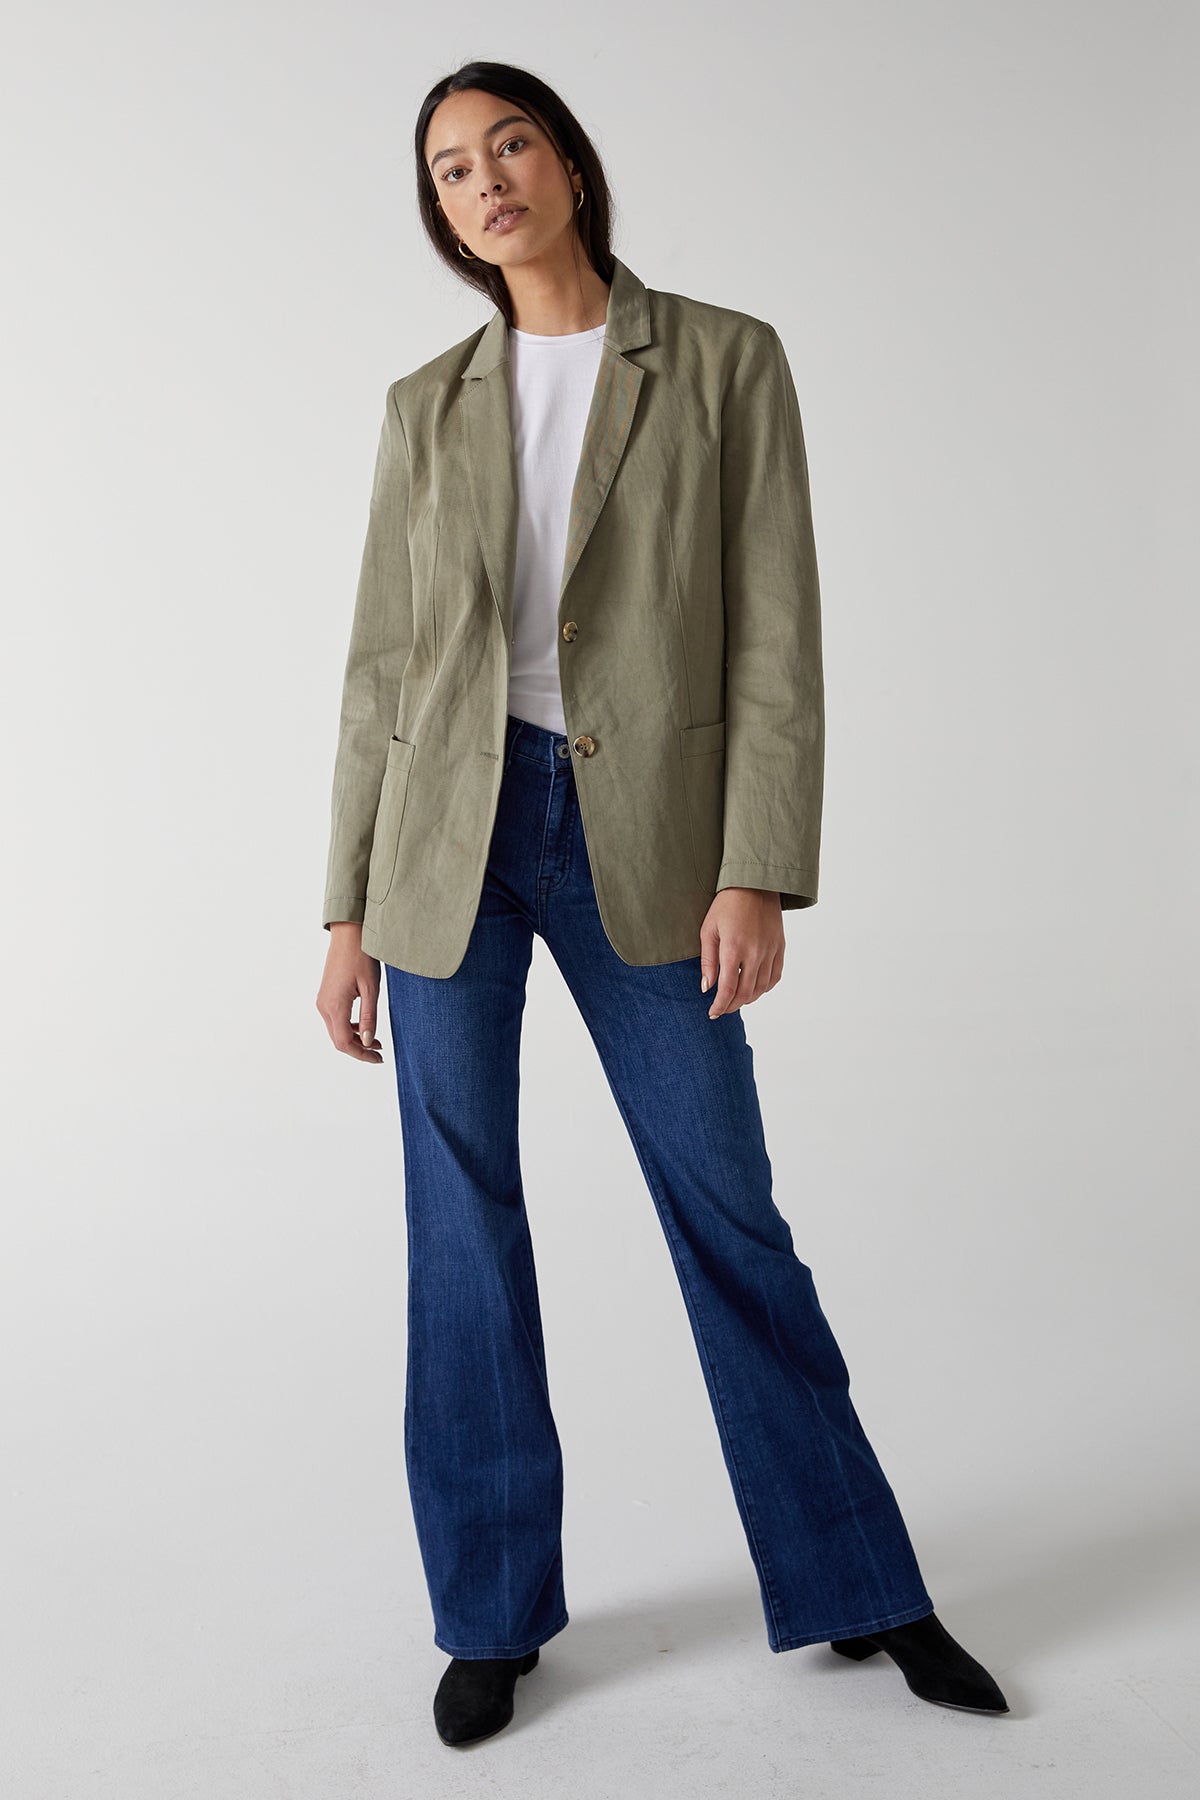 The model is wearing a ECHO BLAZER by Velvet by Jenny Graham and flared jeans.-25316070686913